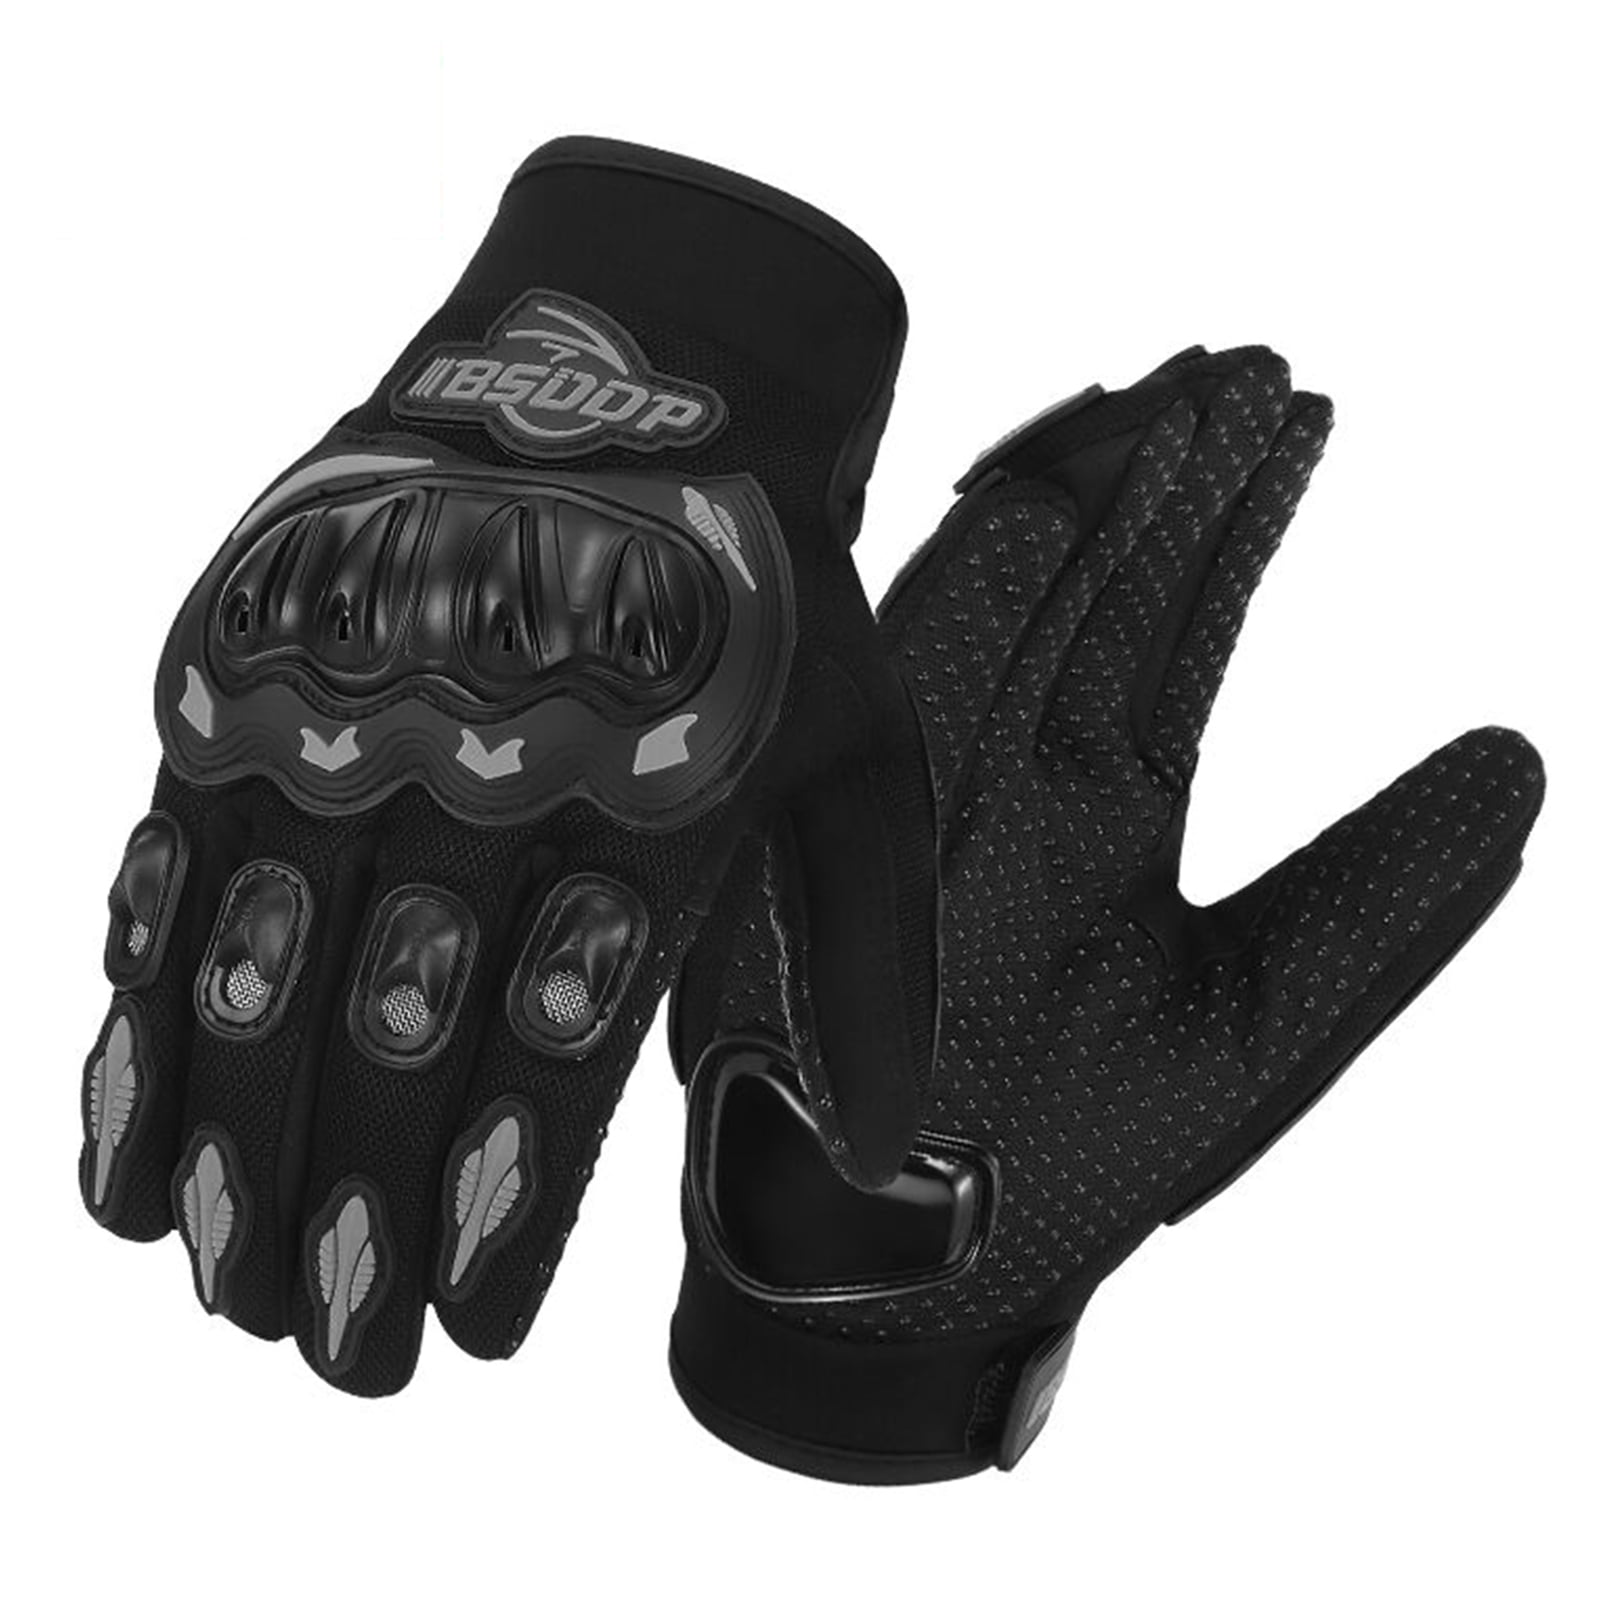 PREDATOR TACTICAL GLOVES CARBON KNUCKLE LEATHER PALM COMBAT BIKERS AIRSOFT 